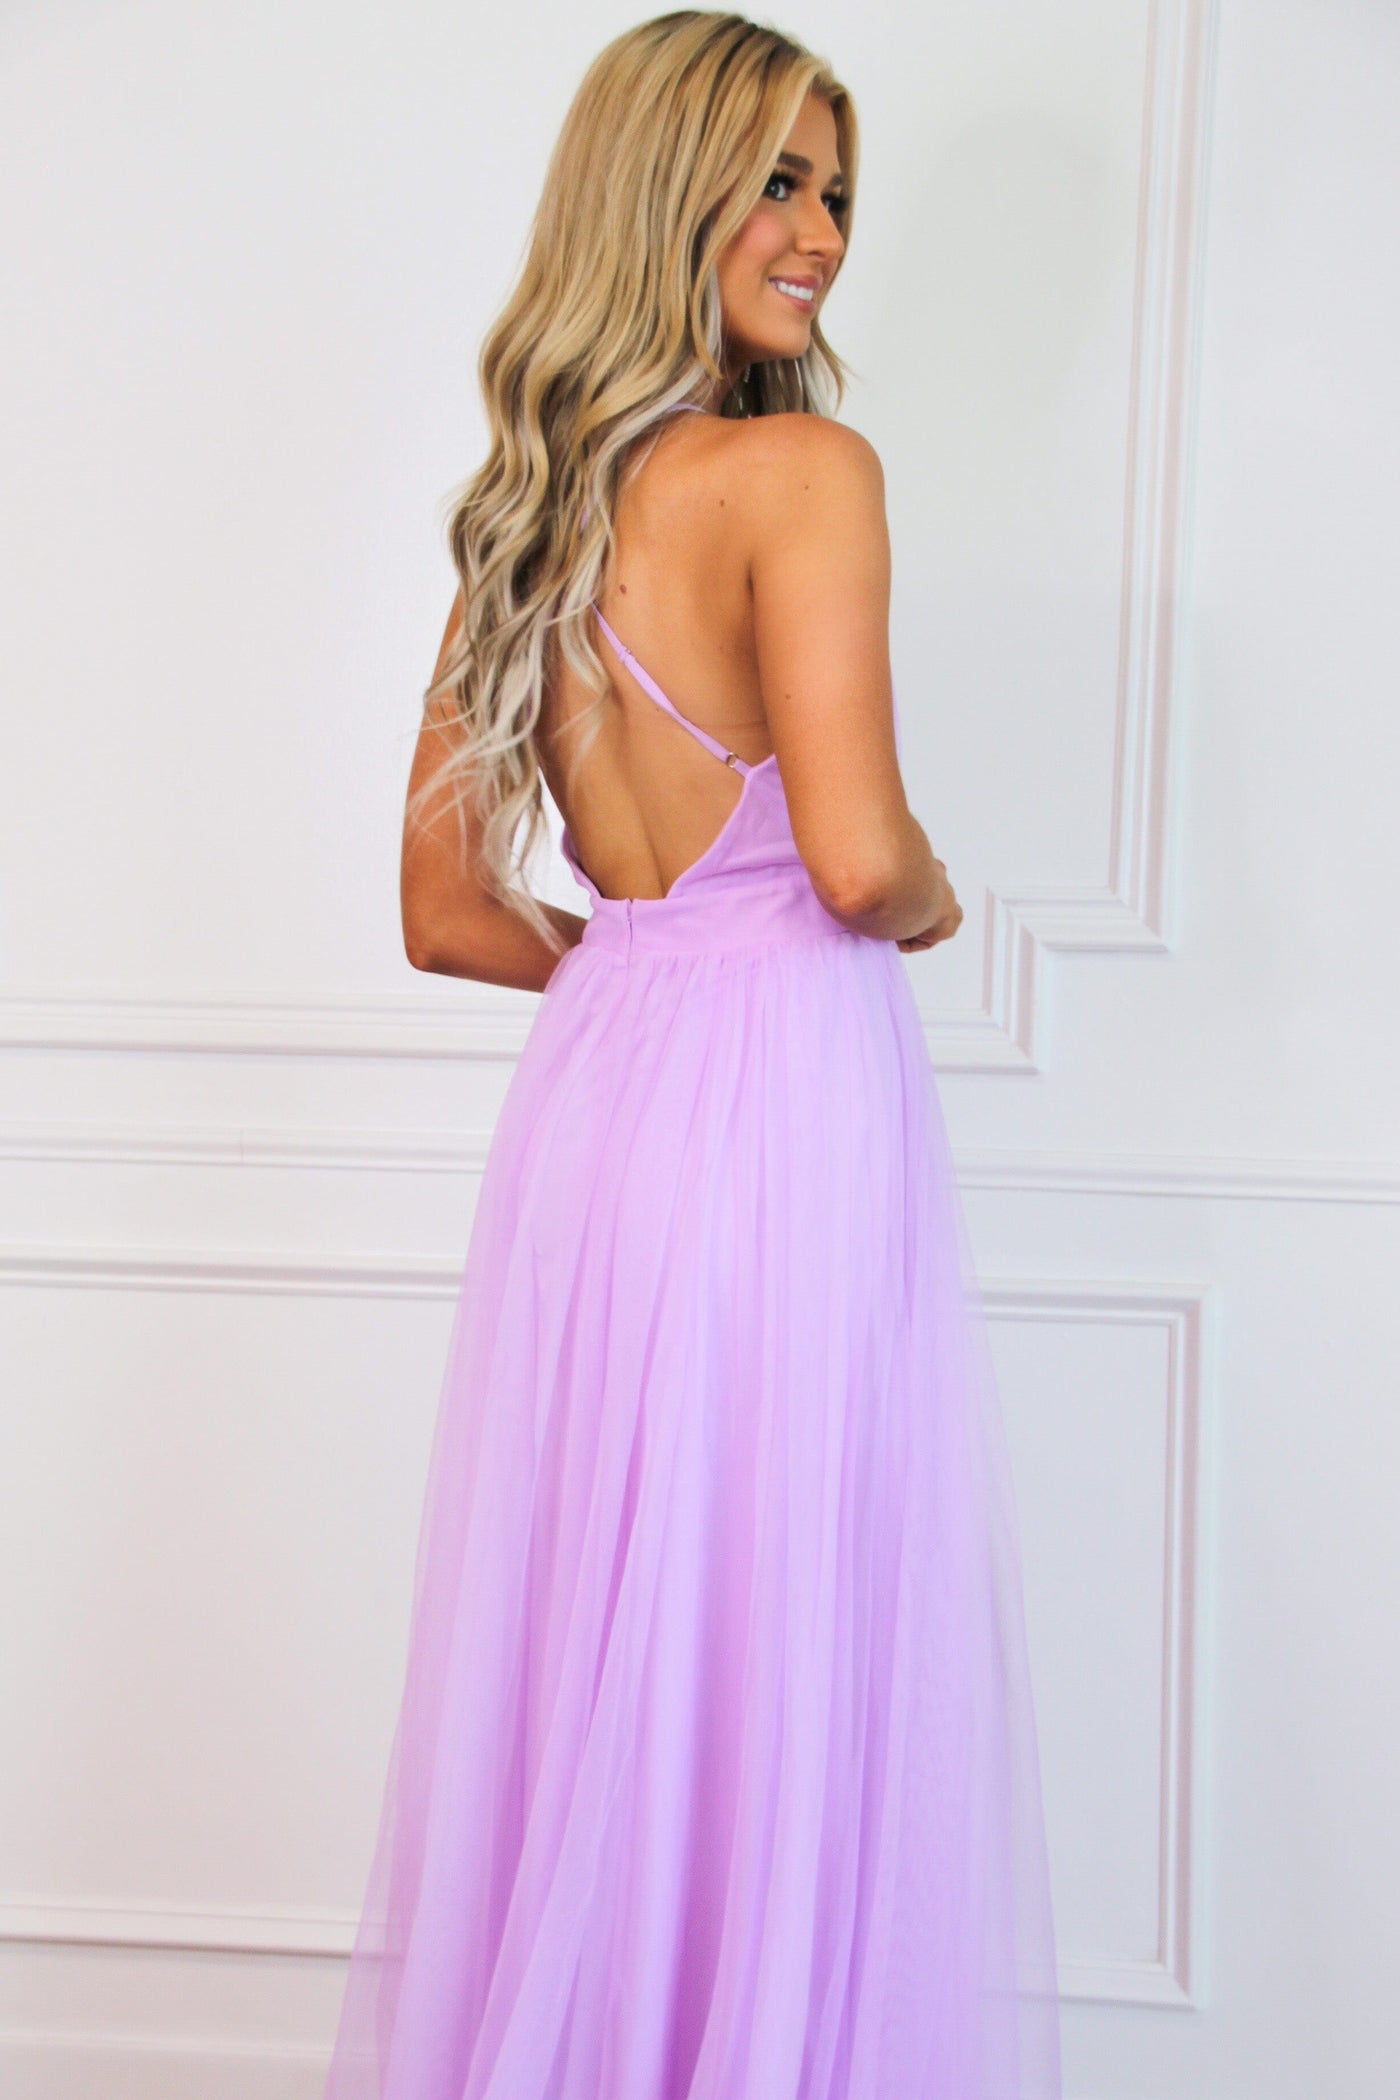 Forever Love Maxi Dress: Lavender - Bella and Bloom Boutique